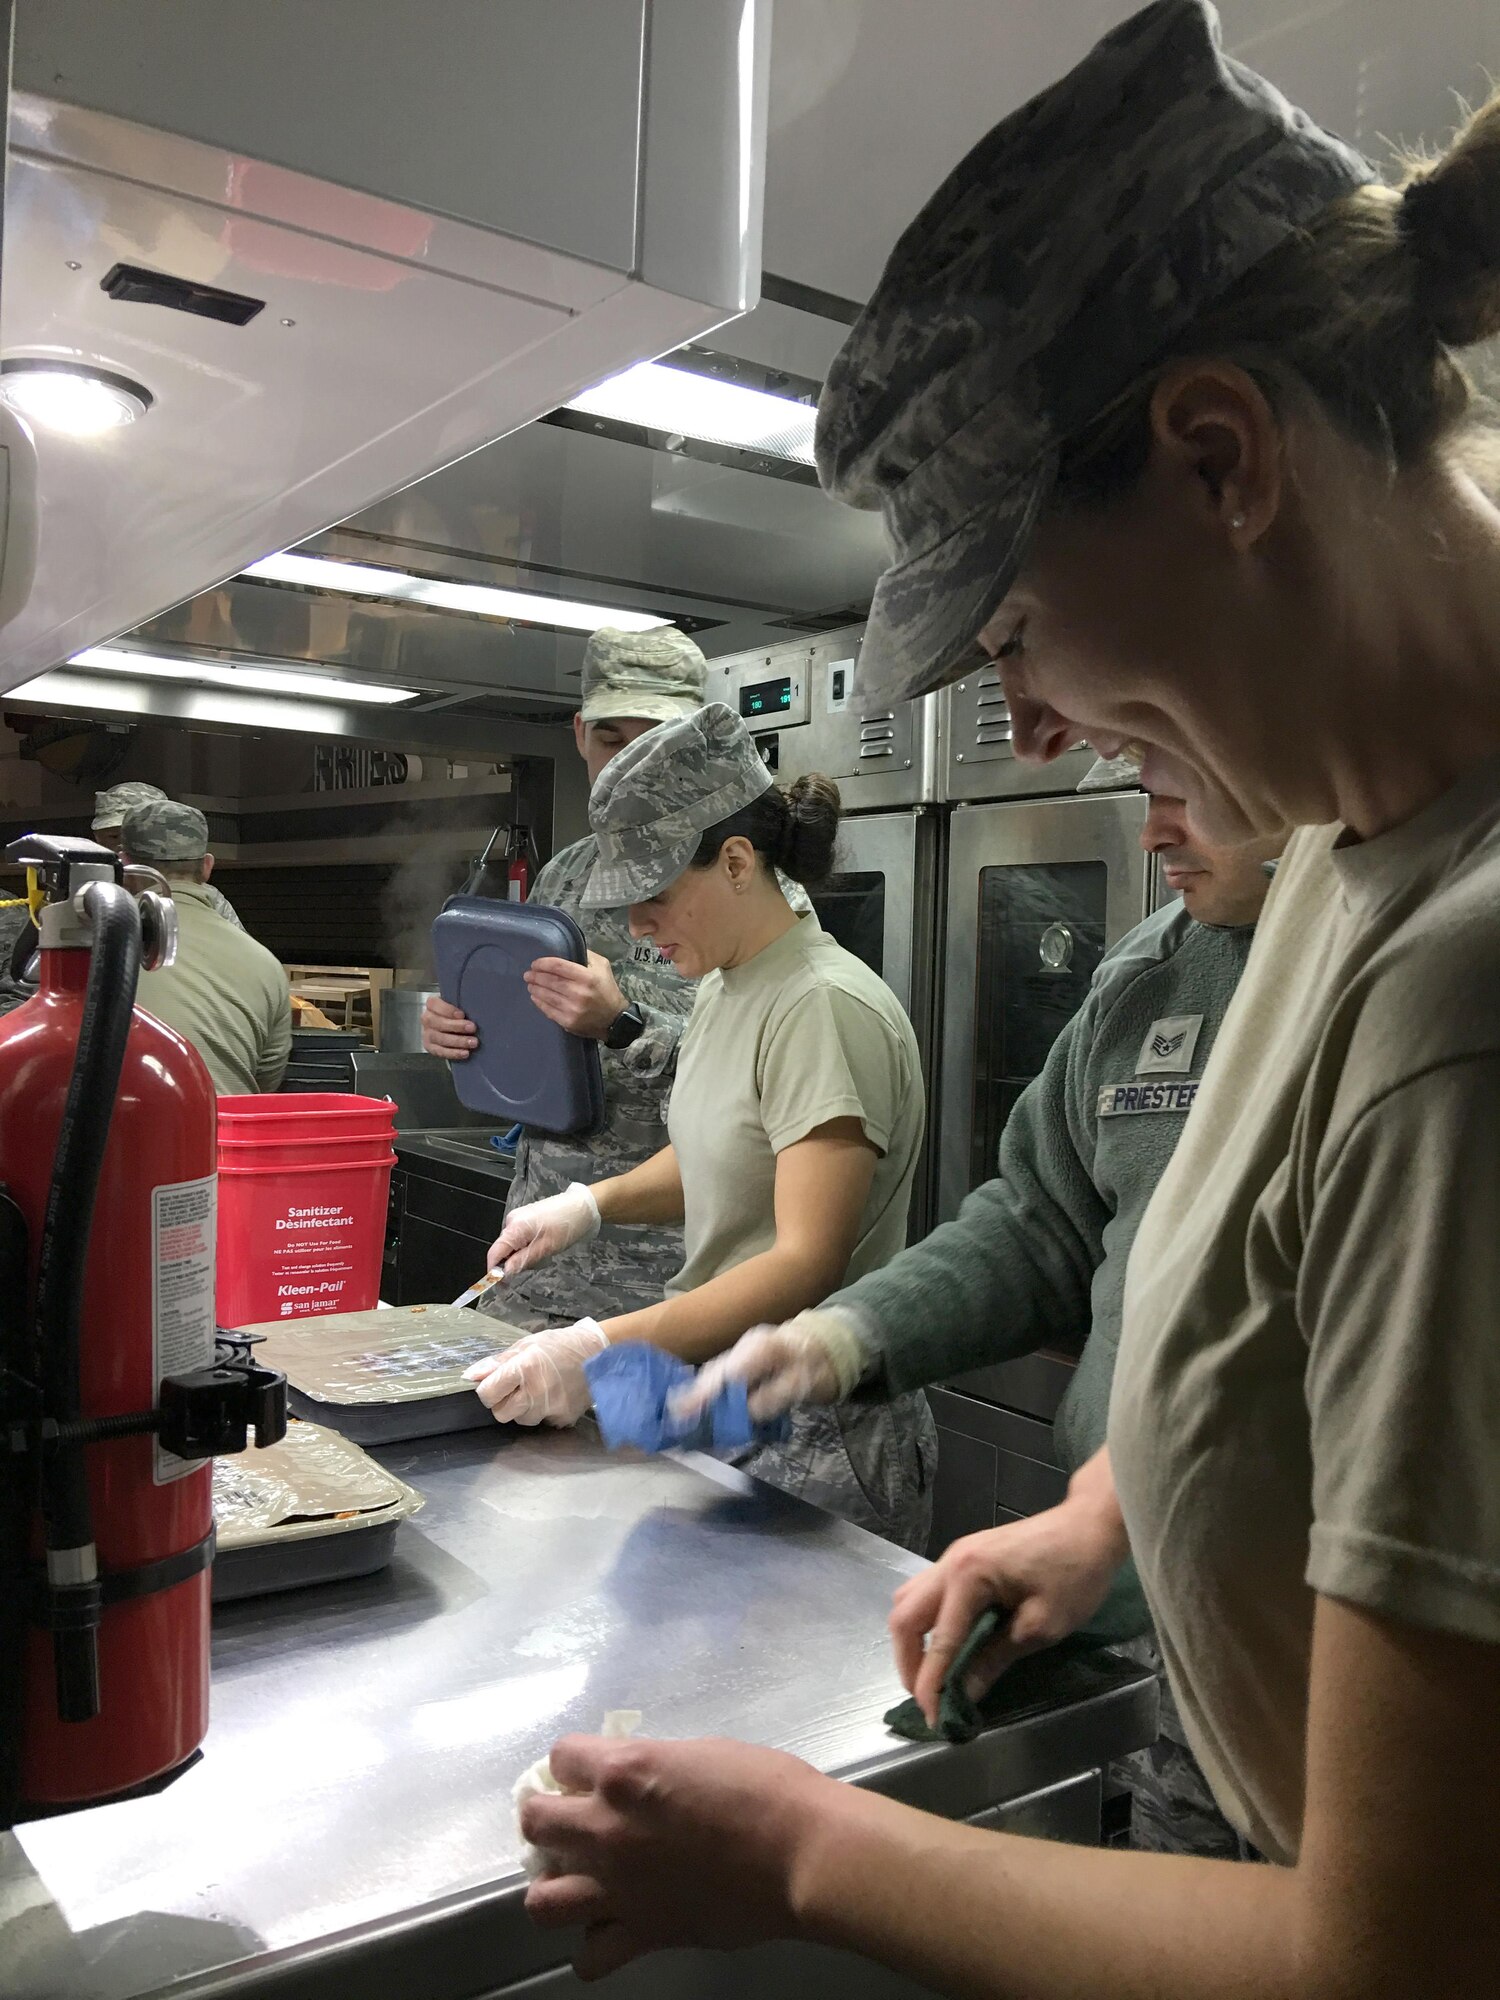 Tech. Sgt. Amanda Bedel from the 123rd Services Flight, 123rd Airlift Wing Louisville, Kentucky, along with fellow Air Guard members from around the country, prepared food Jan. 18, 2017, for thousands of Soldiers and Airmen supporting the 58th Presidential Inauguration in Washington, D.C. Bedel, and other members of the services flight, along with Kentucky Airmen from the 123rd Explosive Ordnance flight,123rd Civil Engineer Squadron and 123rd Special Tactics Squadron who performed various duties while there. (U.S. Air National Guard photo by 2nd Lt. Susan Penning/Released)
